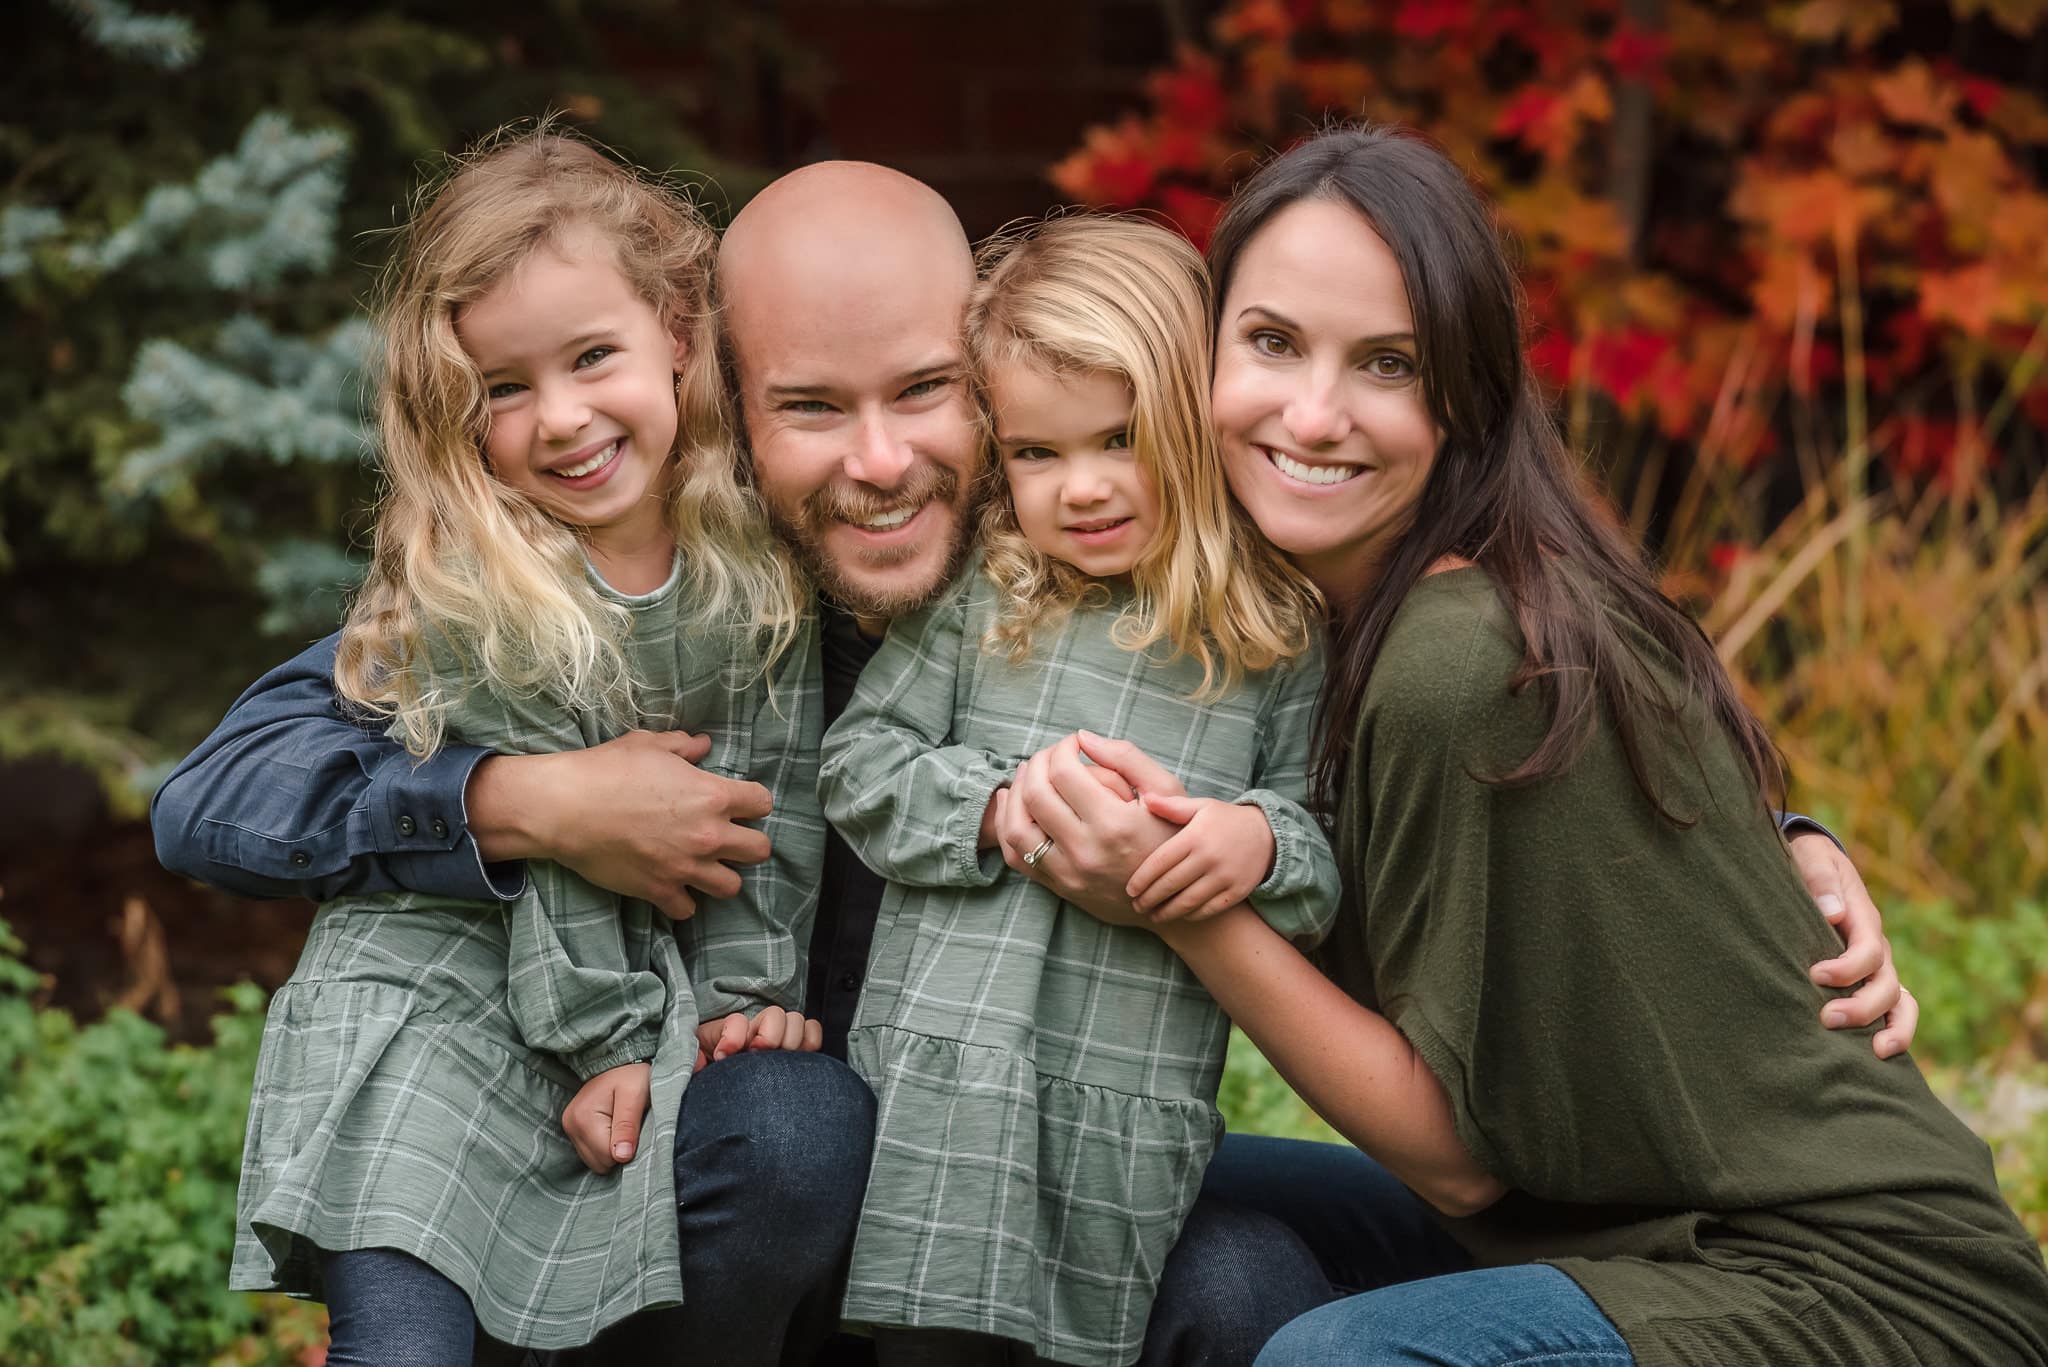 A family of four dressed in green with pretty red autumn foliage in the background.